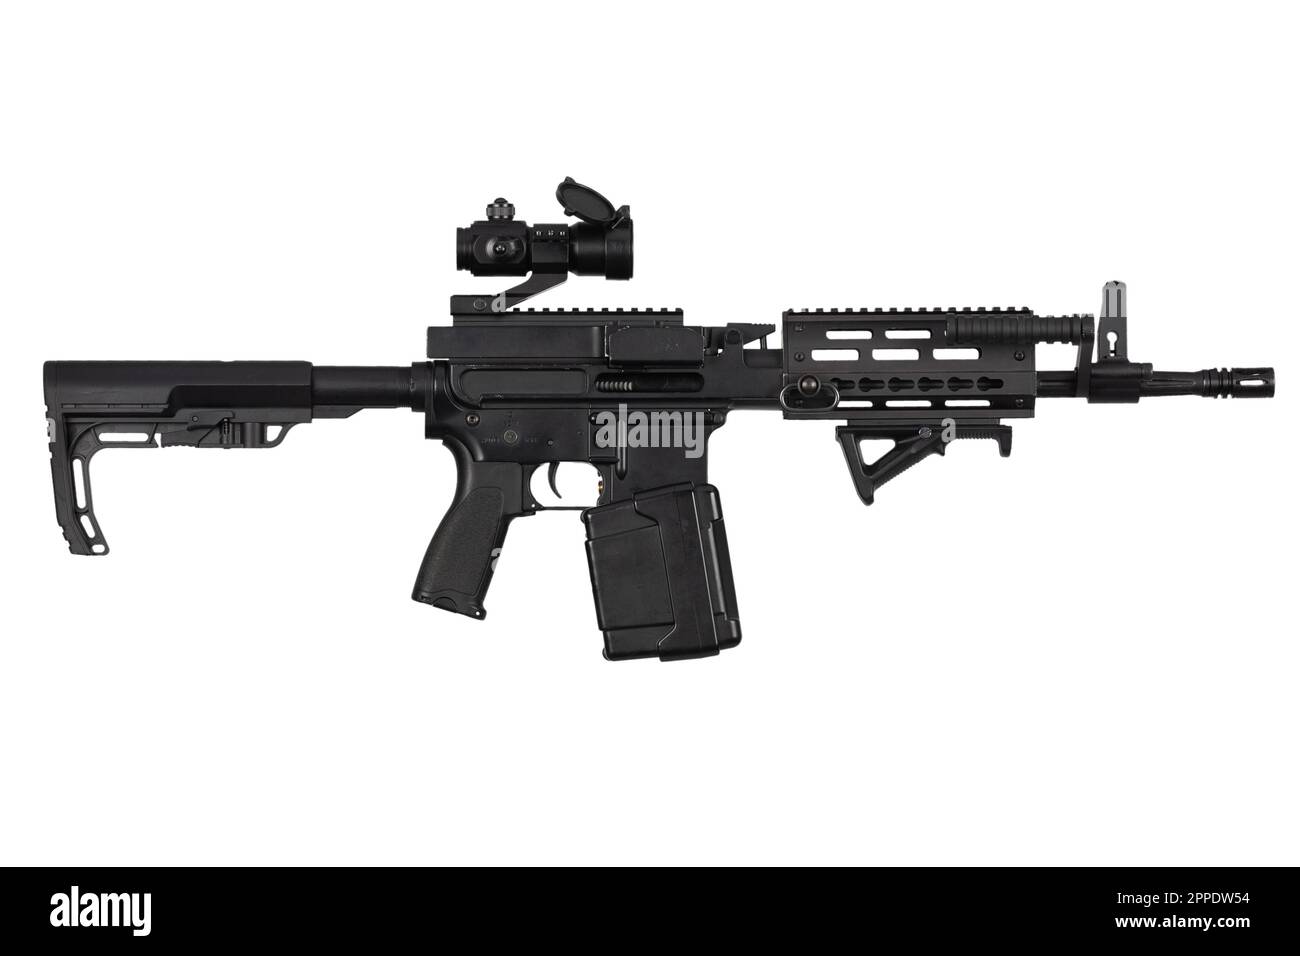 Carbine with belt-fed upper receiver that convert AR-15 or M16 from a standard, magazine rifle to light machine gun. Isolated on a white background Stock Photo